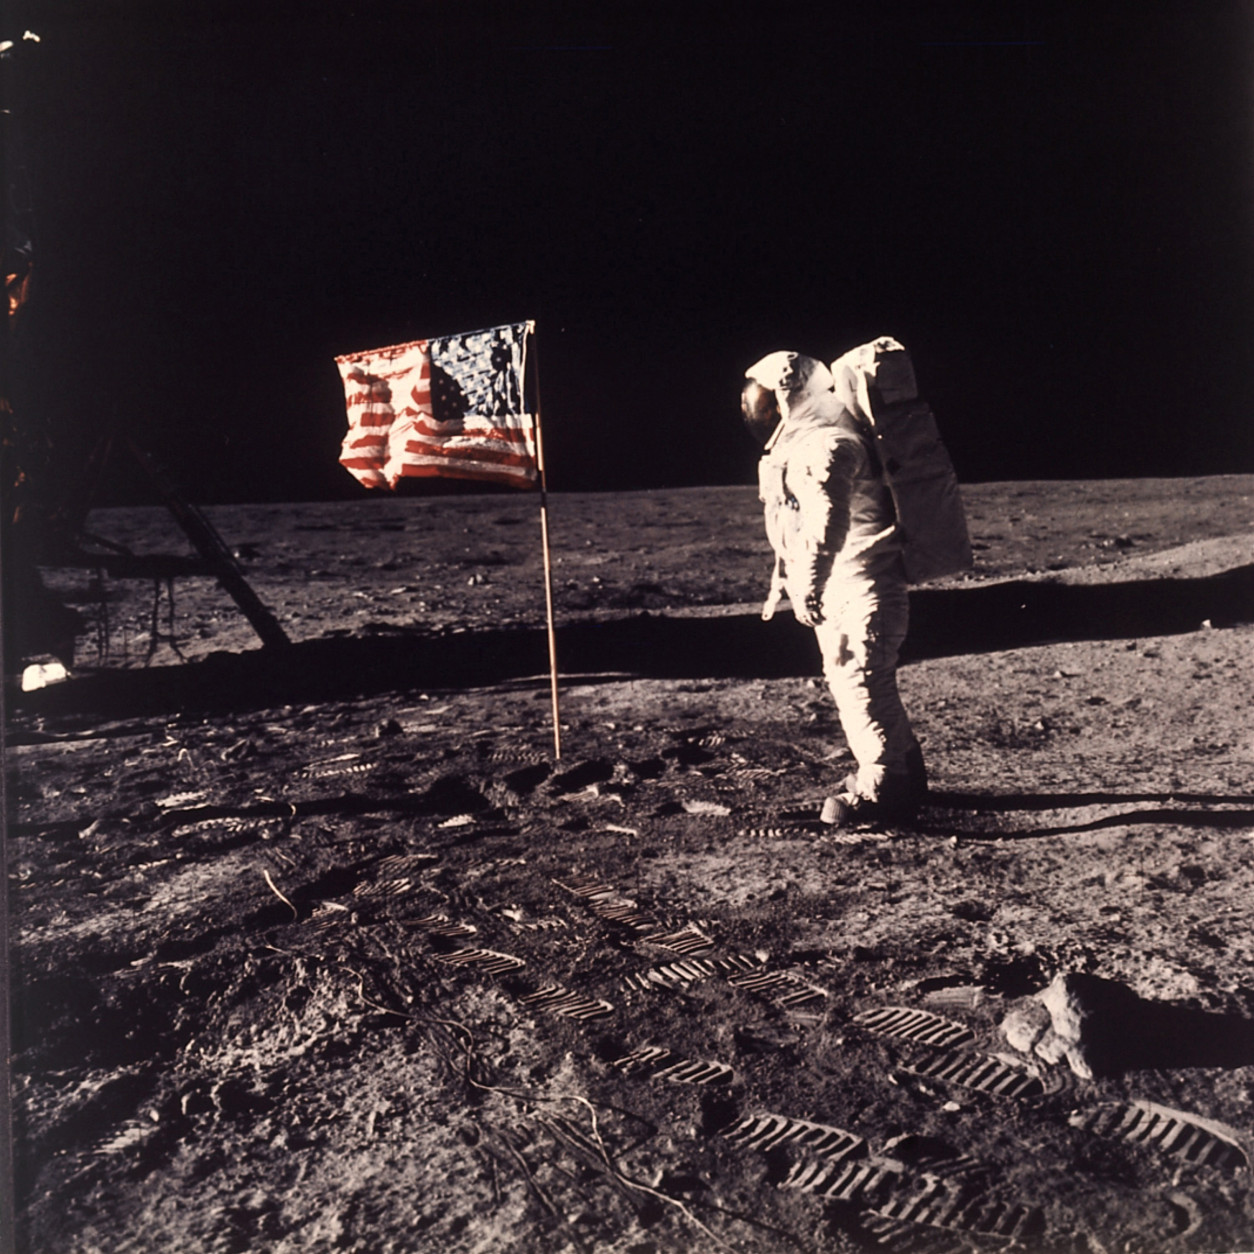 Astronaut Edwin E. "Buzz" Aldrin Jr.  poses for a photograph beside the U.S. flag deployed on the moon during the Apollo 11 mission on July 20, 1969.  Aldrin and fellow astronaut Neil Armstrong were the first men to walk on the lunar surface with temperatures ranging from 243 degrees above to 279 degrees below zero.  Astronaut  Michael Collins flew the command module.  The trio was launched to the moon by a Saturn V launch vehicle at 9:32 a.m. EDT, July 16, 1969. They departed the moon July 21, 1969. (AP Photo/NASA/Neil A. Armstrong)